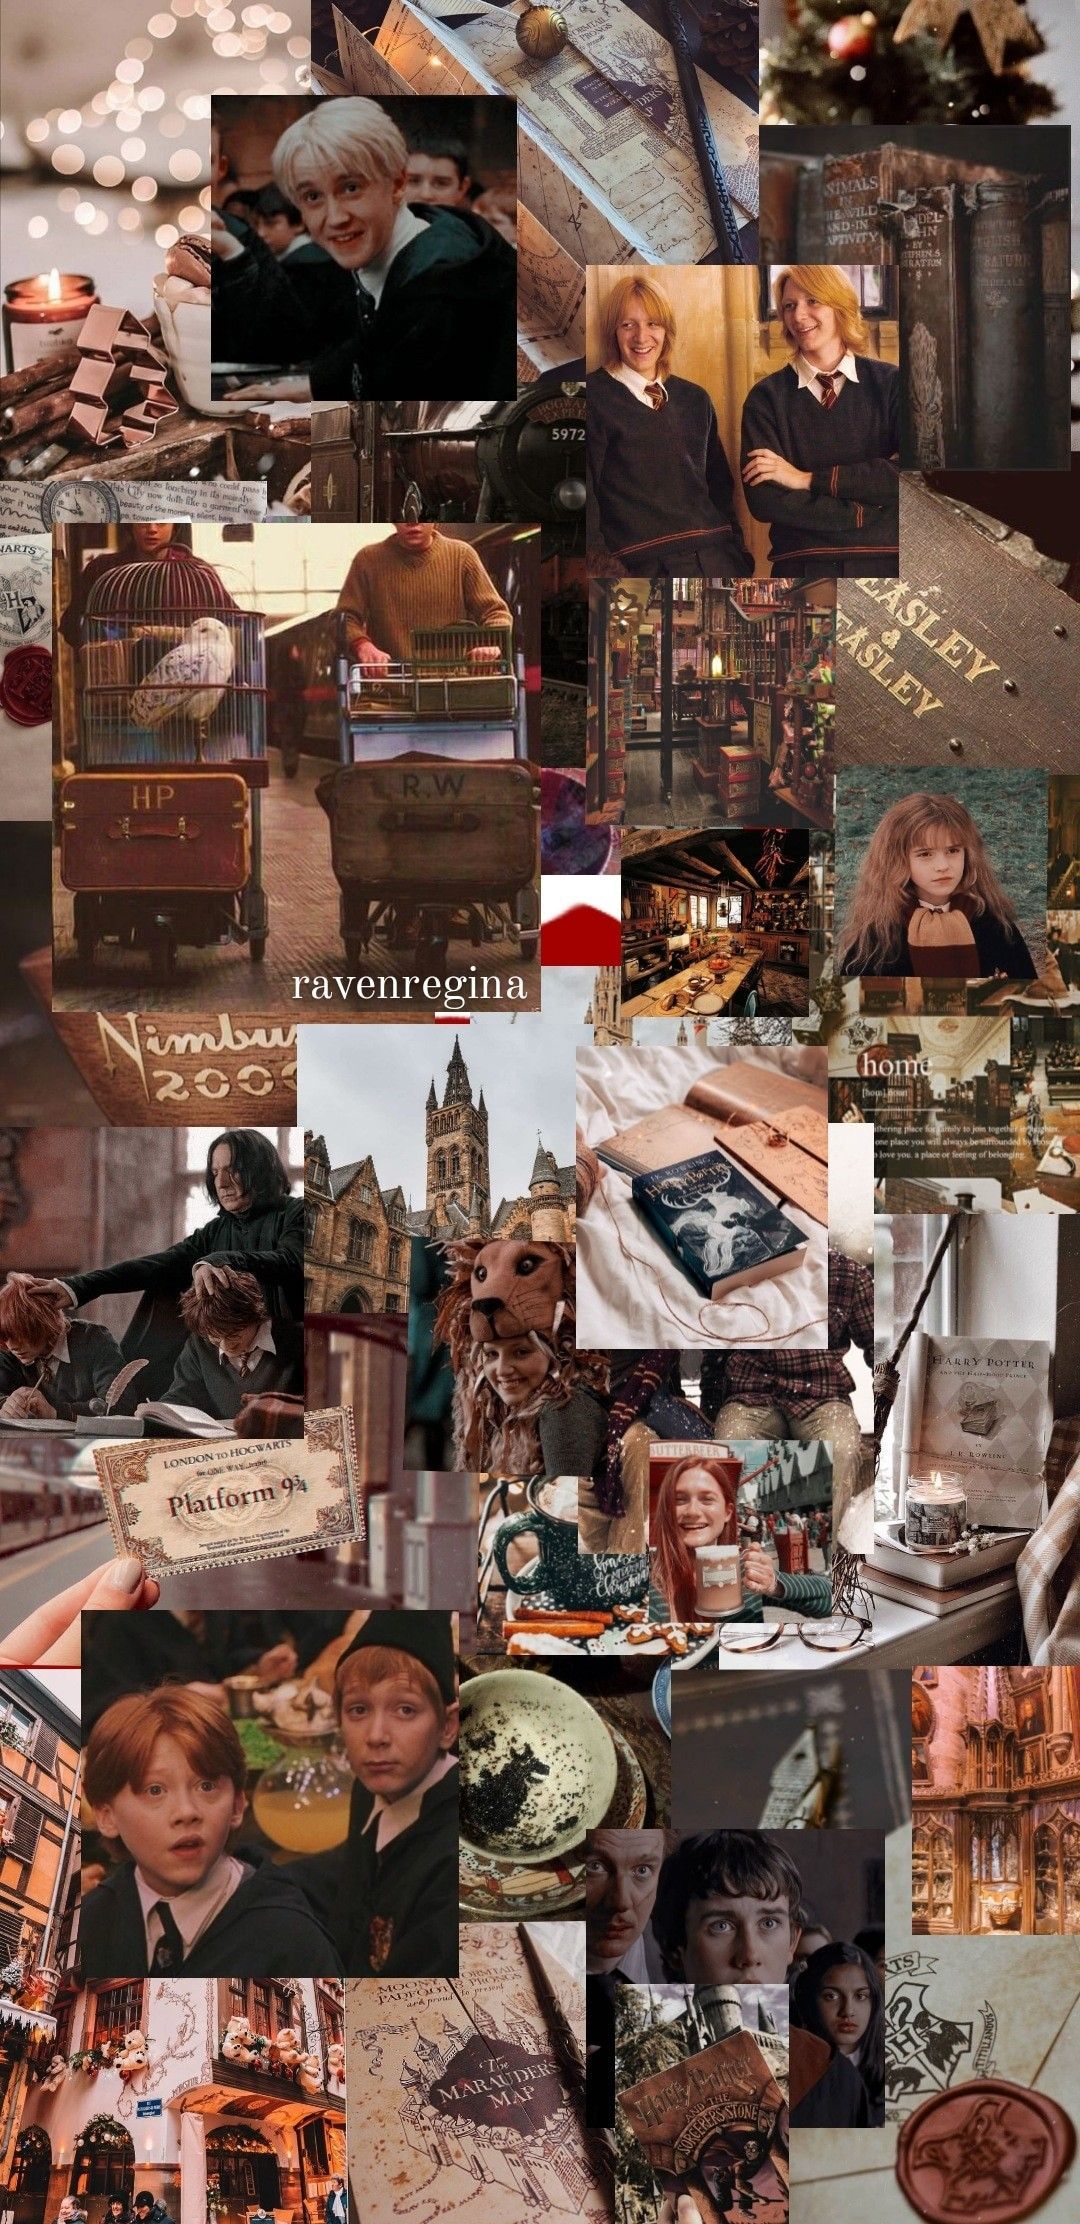 Harry Potter aesthetic wallpaper, backgrounds, pictures, and photos for your phone and desktop. - Harry Potter